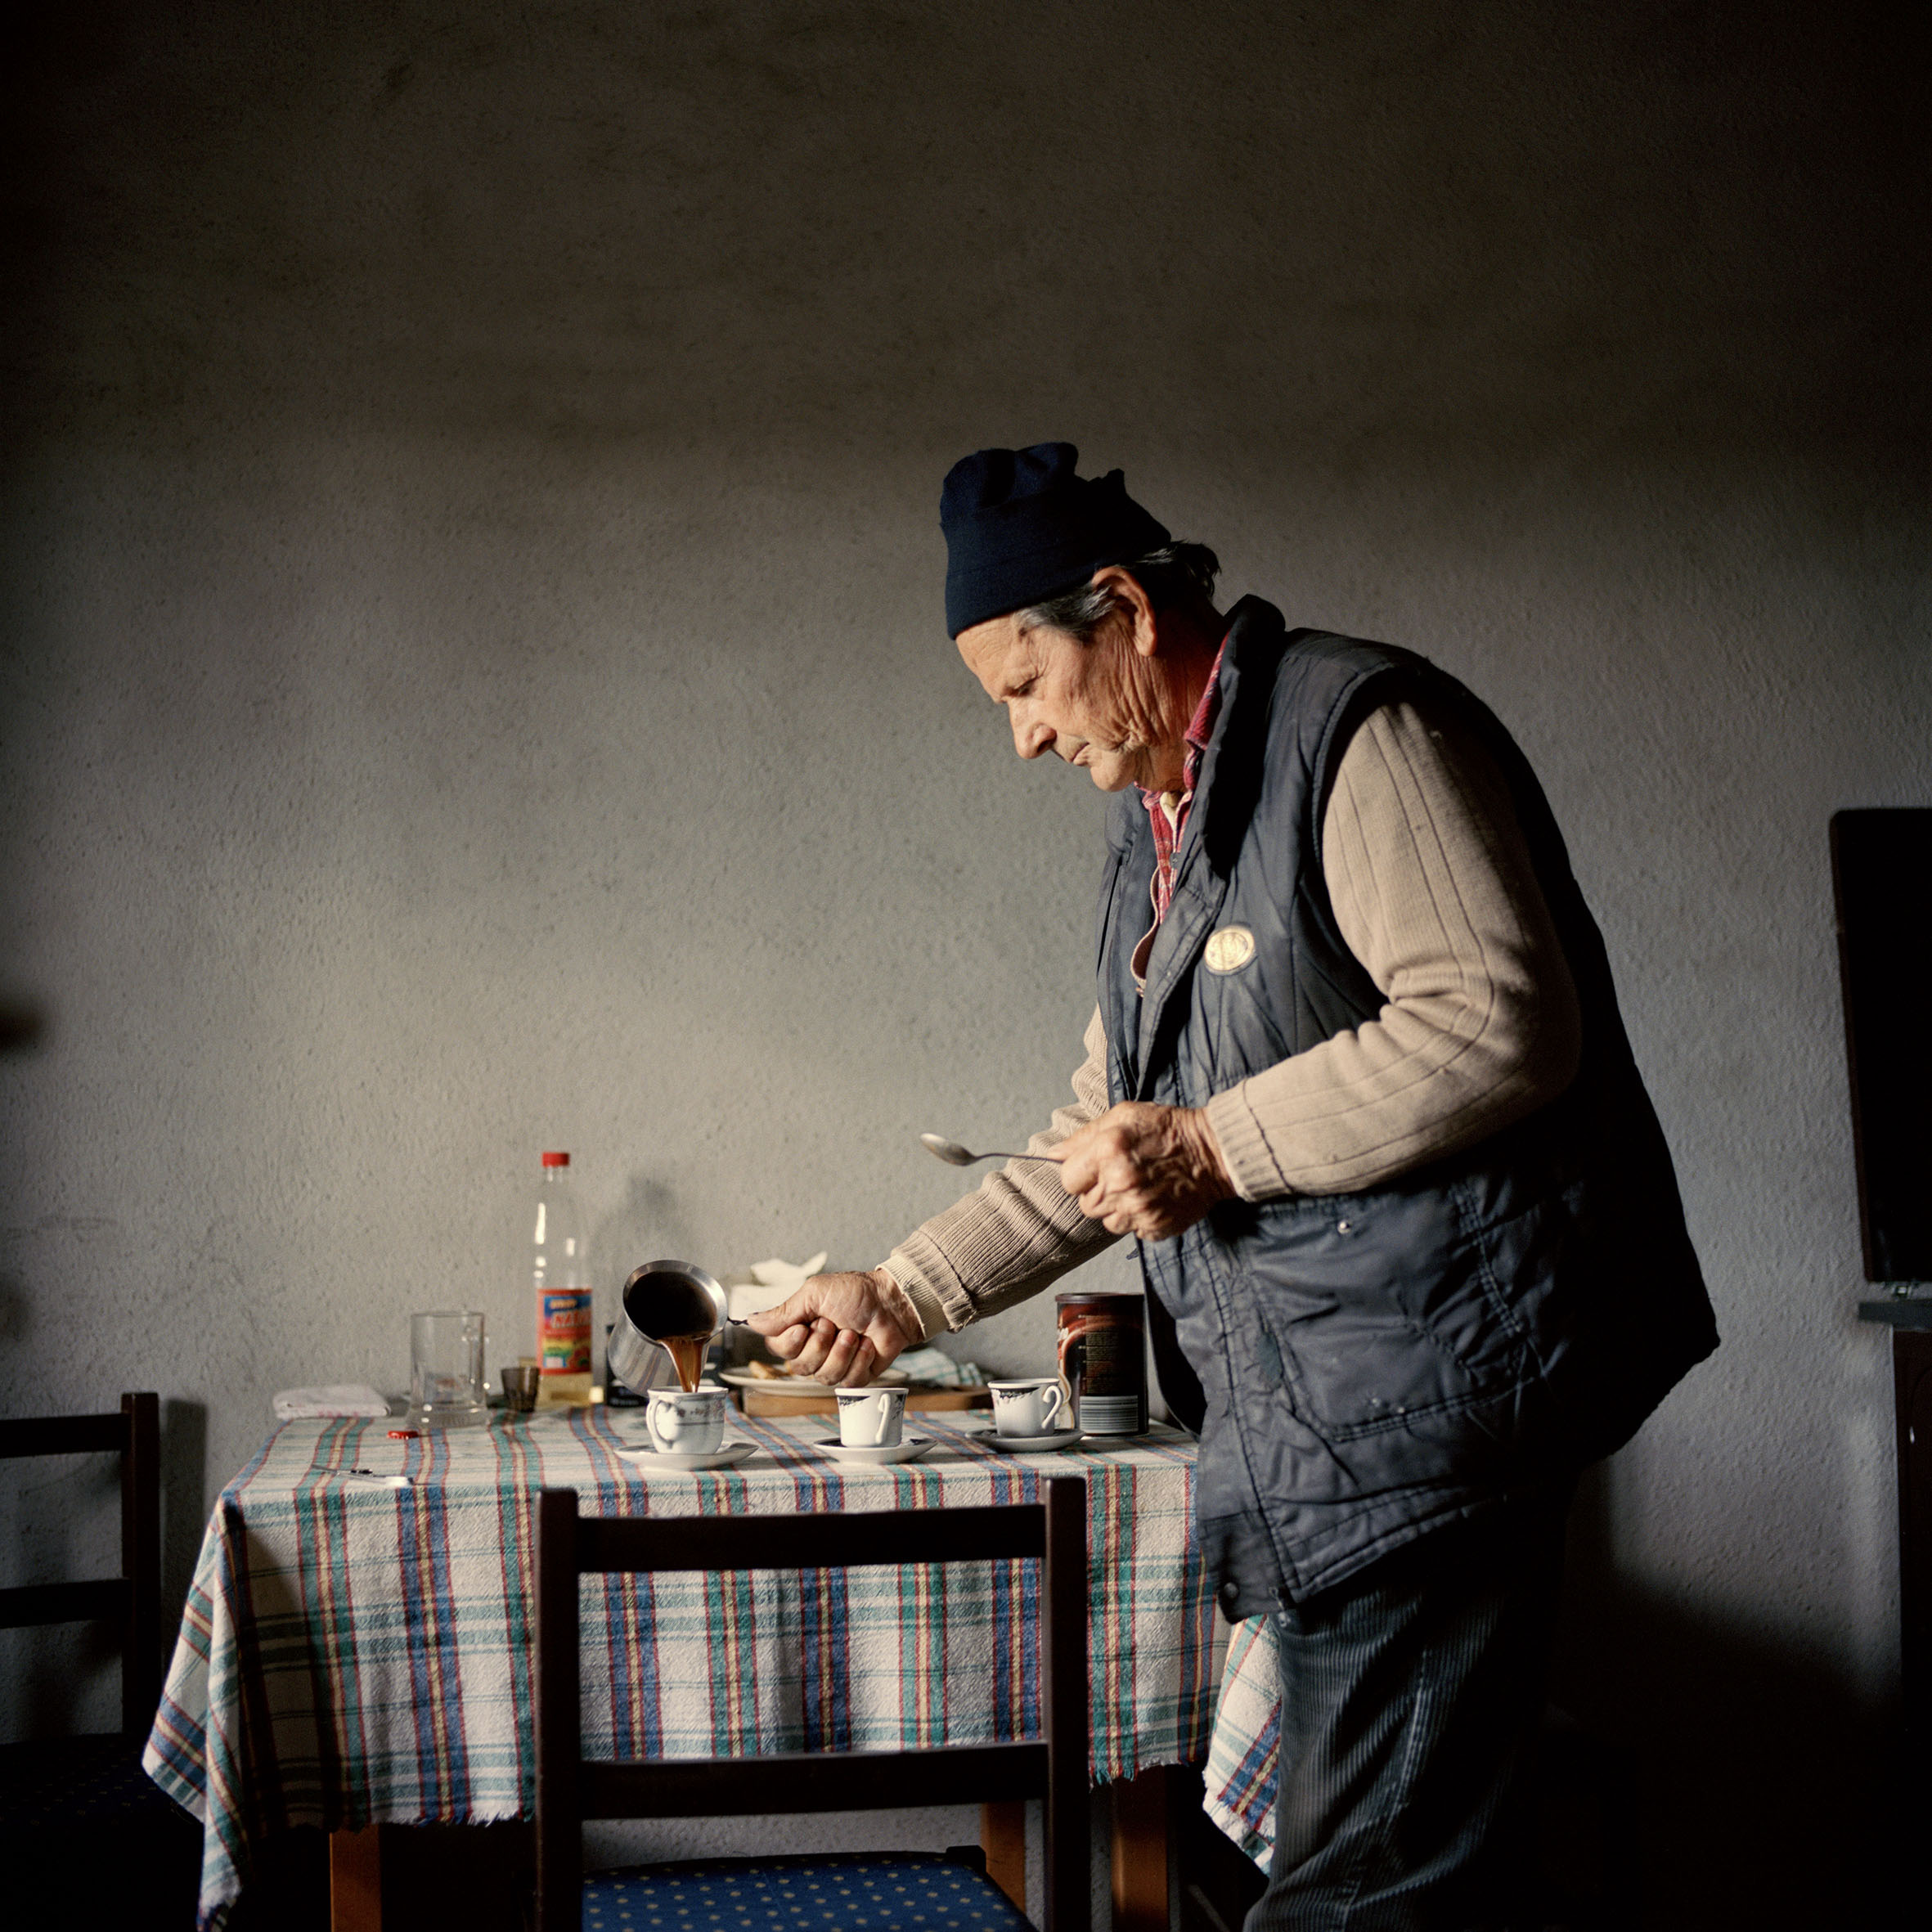  Branko Banic makes a customary cup of Turkish coffee in his newly rebuilt kitchen. When he and his wife Maria returned to Croatia in 2006 their house was completely dilapidated. After 6 months of living with cousins nearby the elderly couple were gi